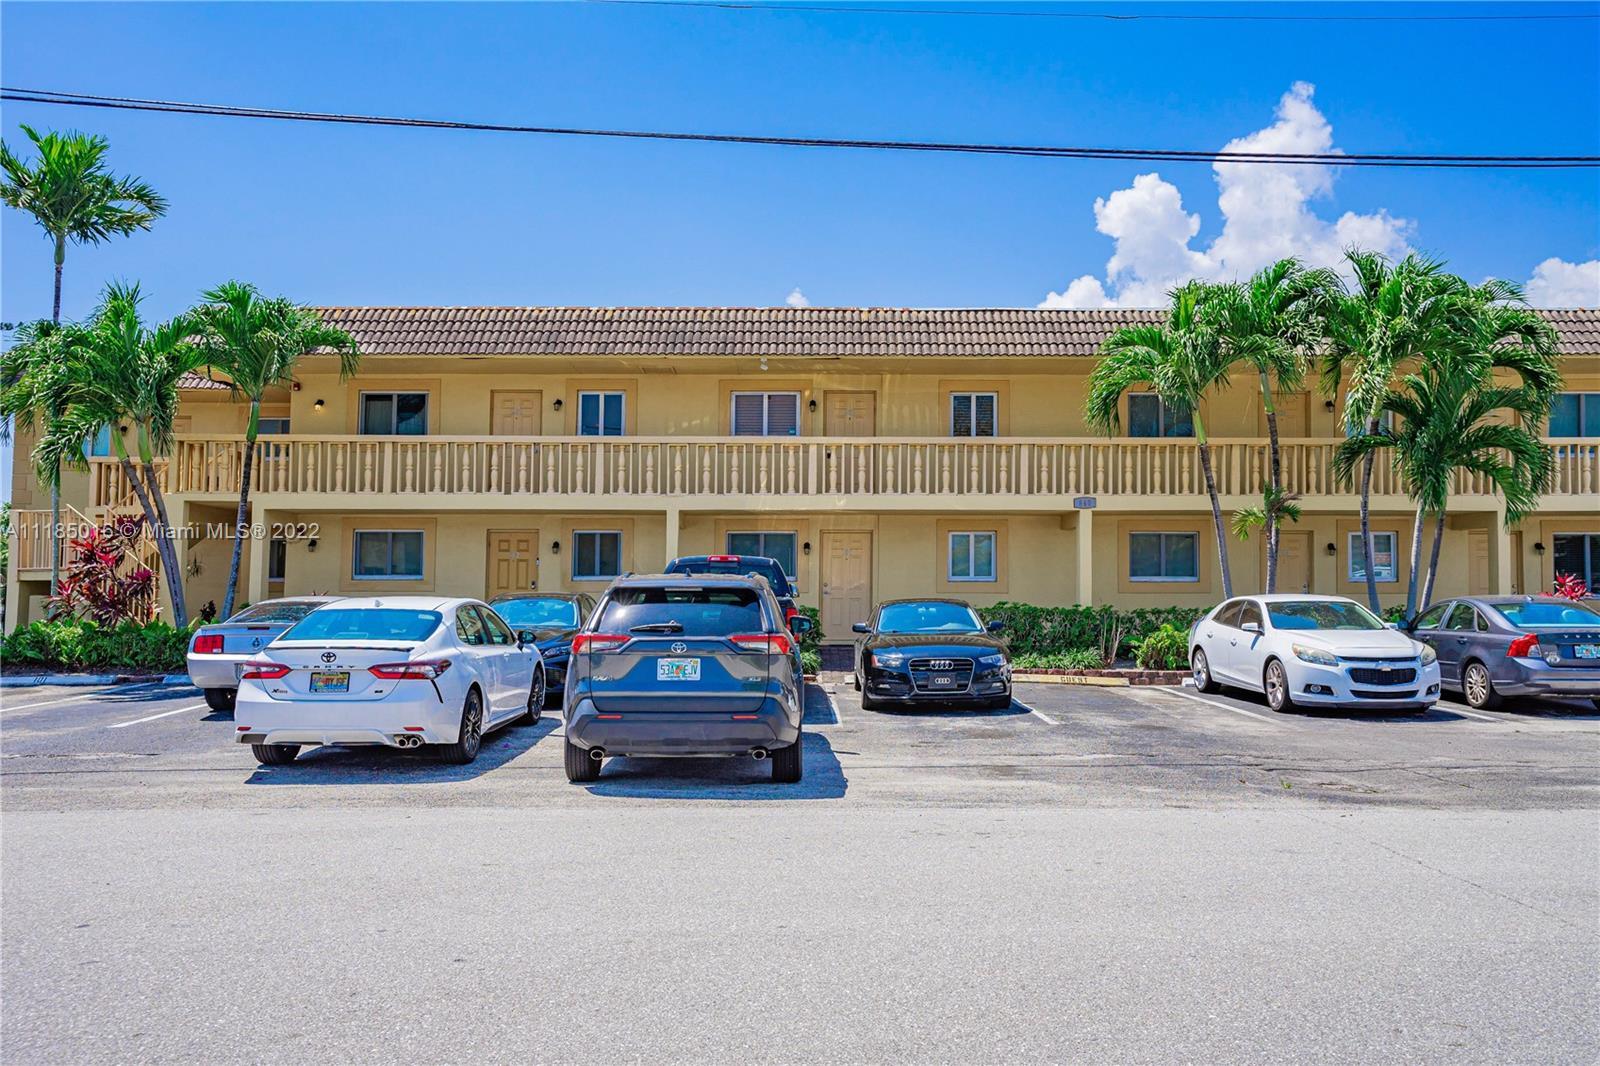 Rarely available 2 bedroom, 2 bathroom unit in boutique building in East Pompano Beach.  Enjoy water